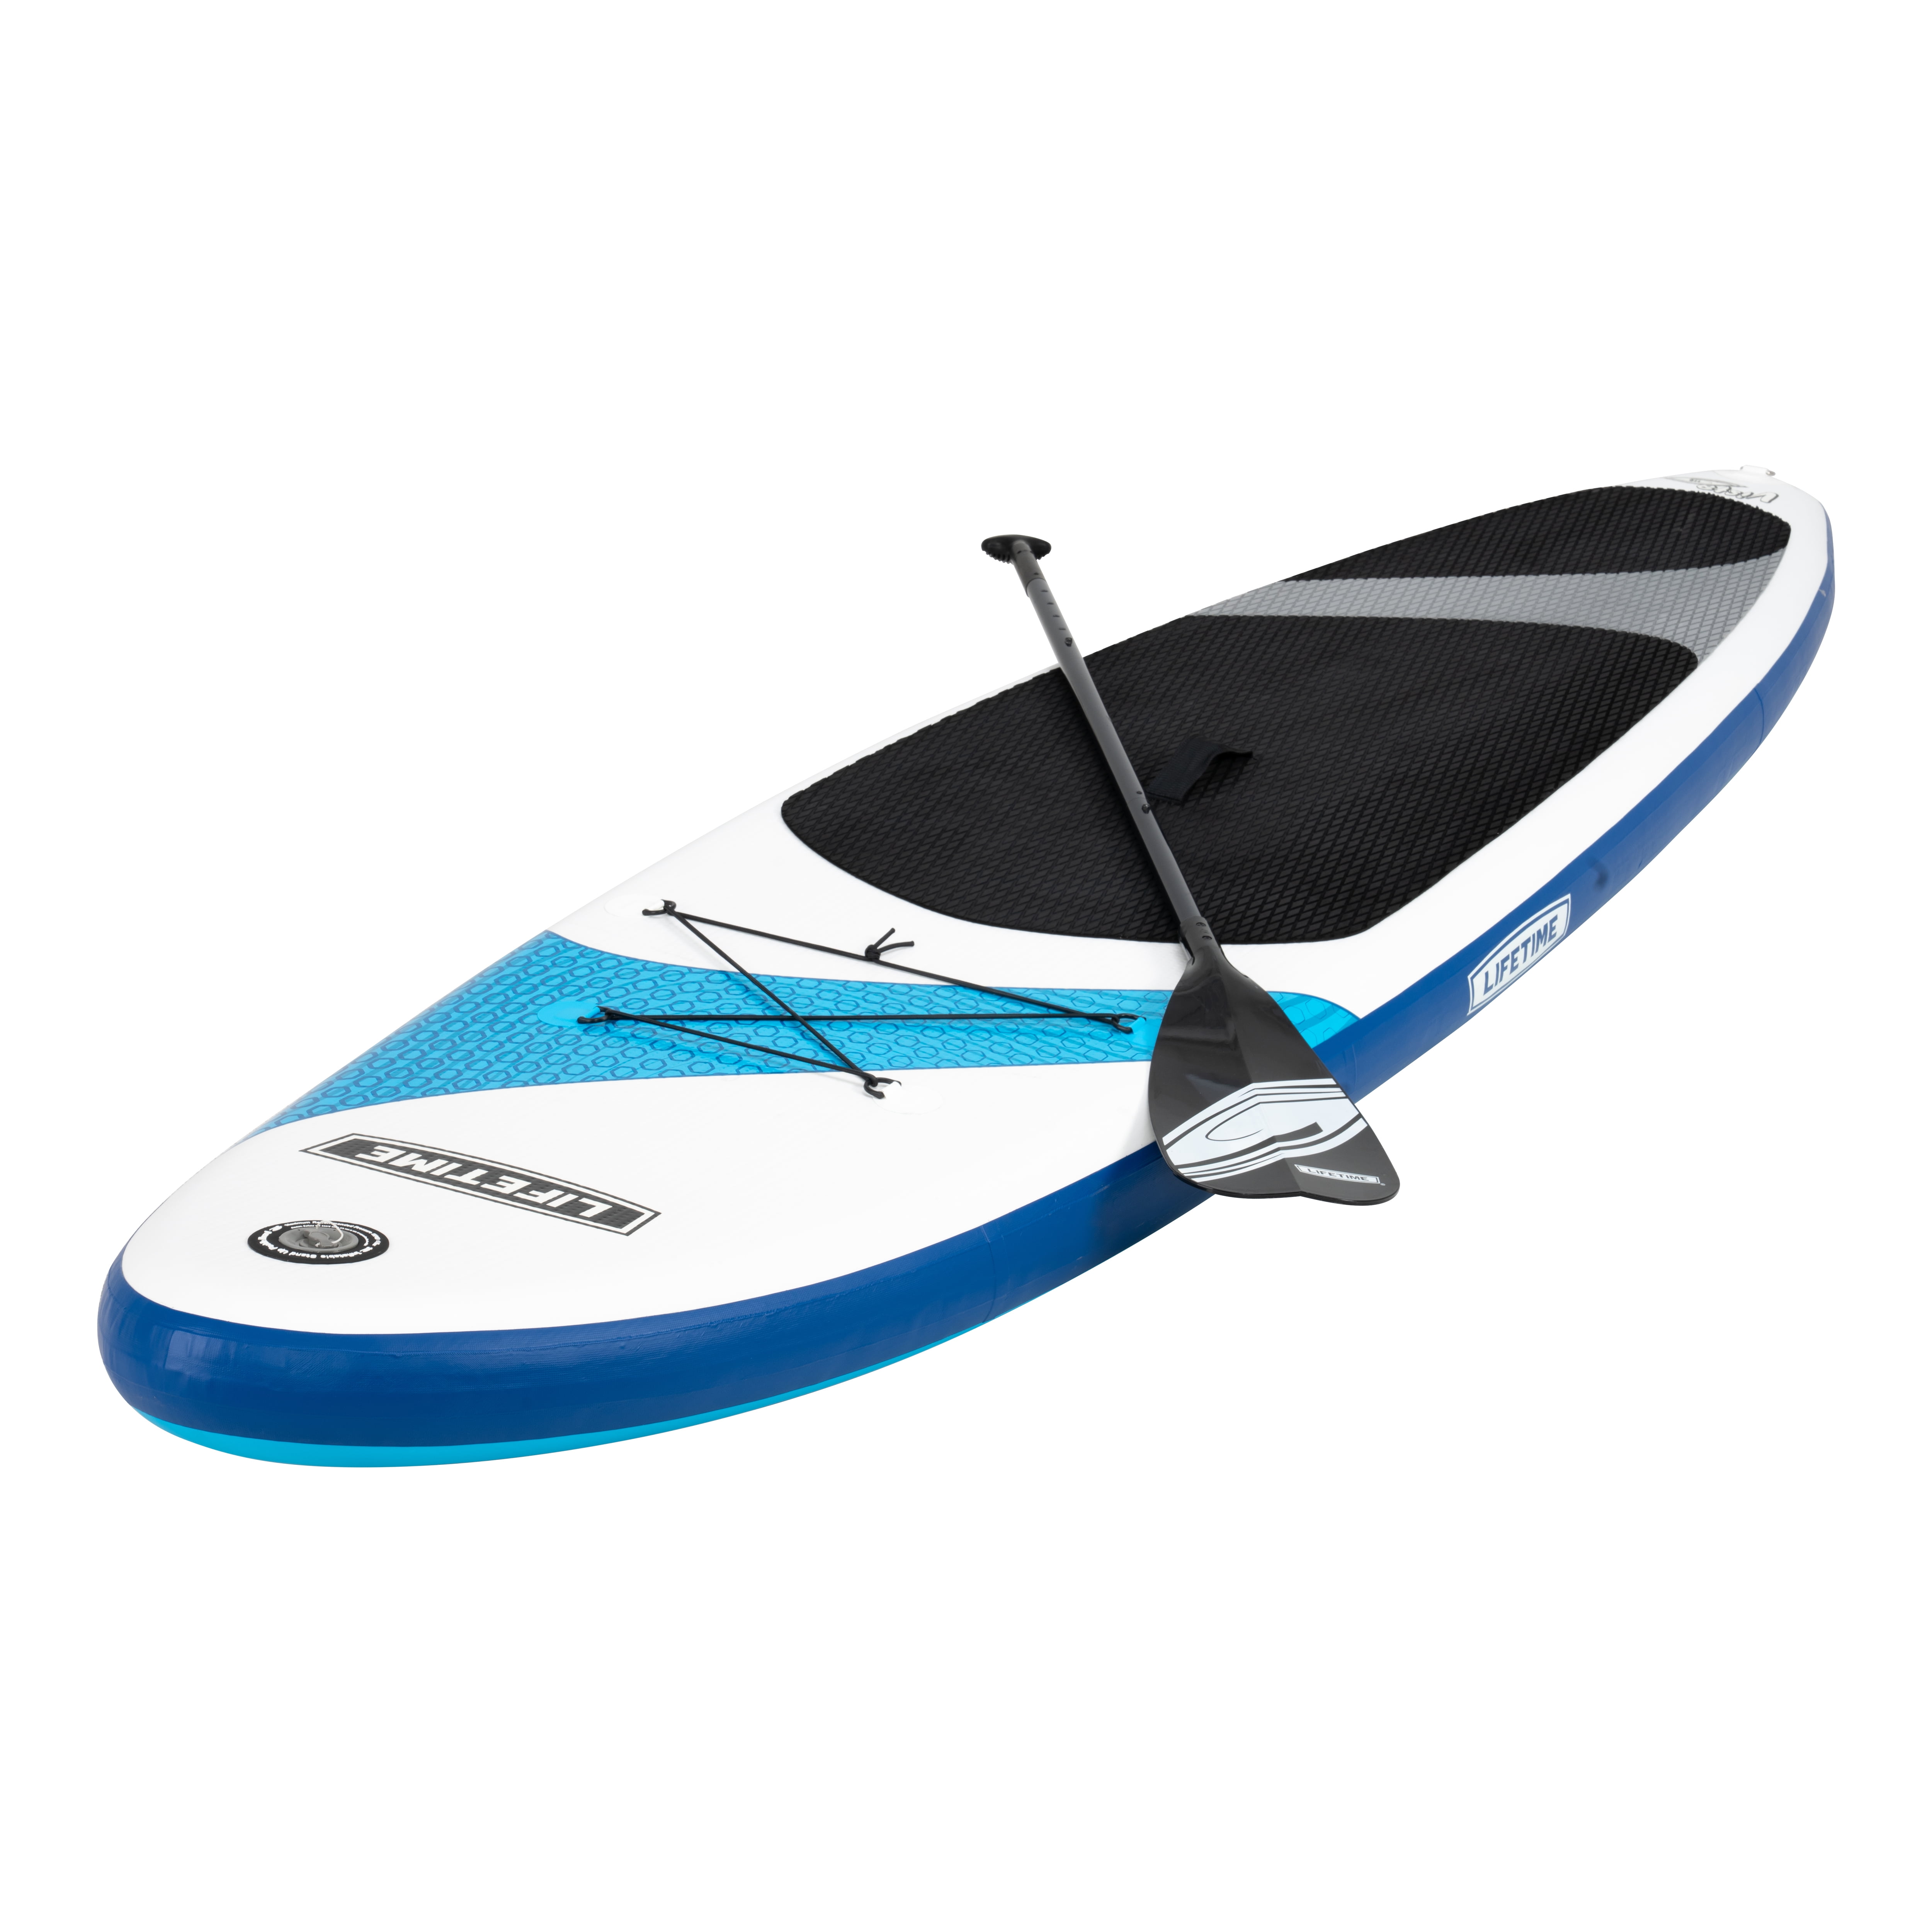 AIRHEAD SUP Training Wheels Paddleboard Paddle Board Stabilizer for Beginner 